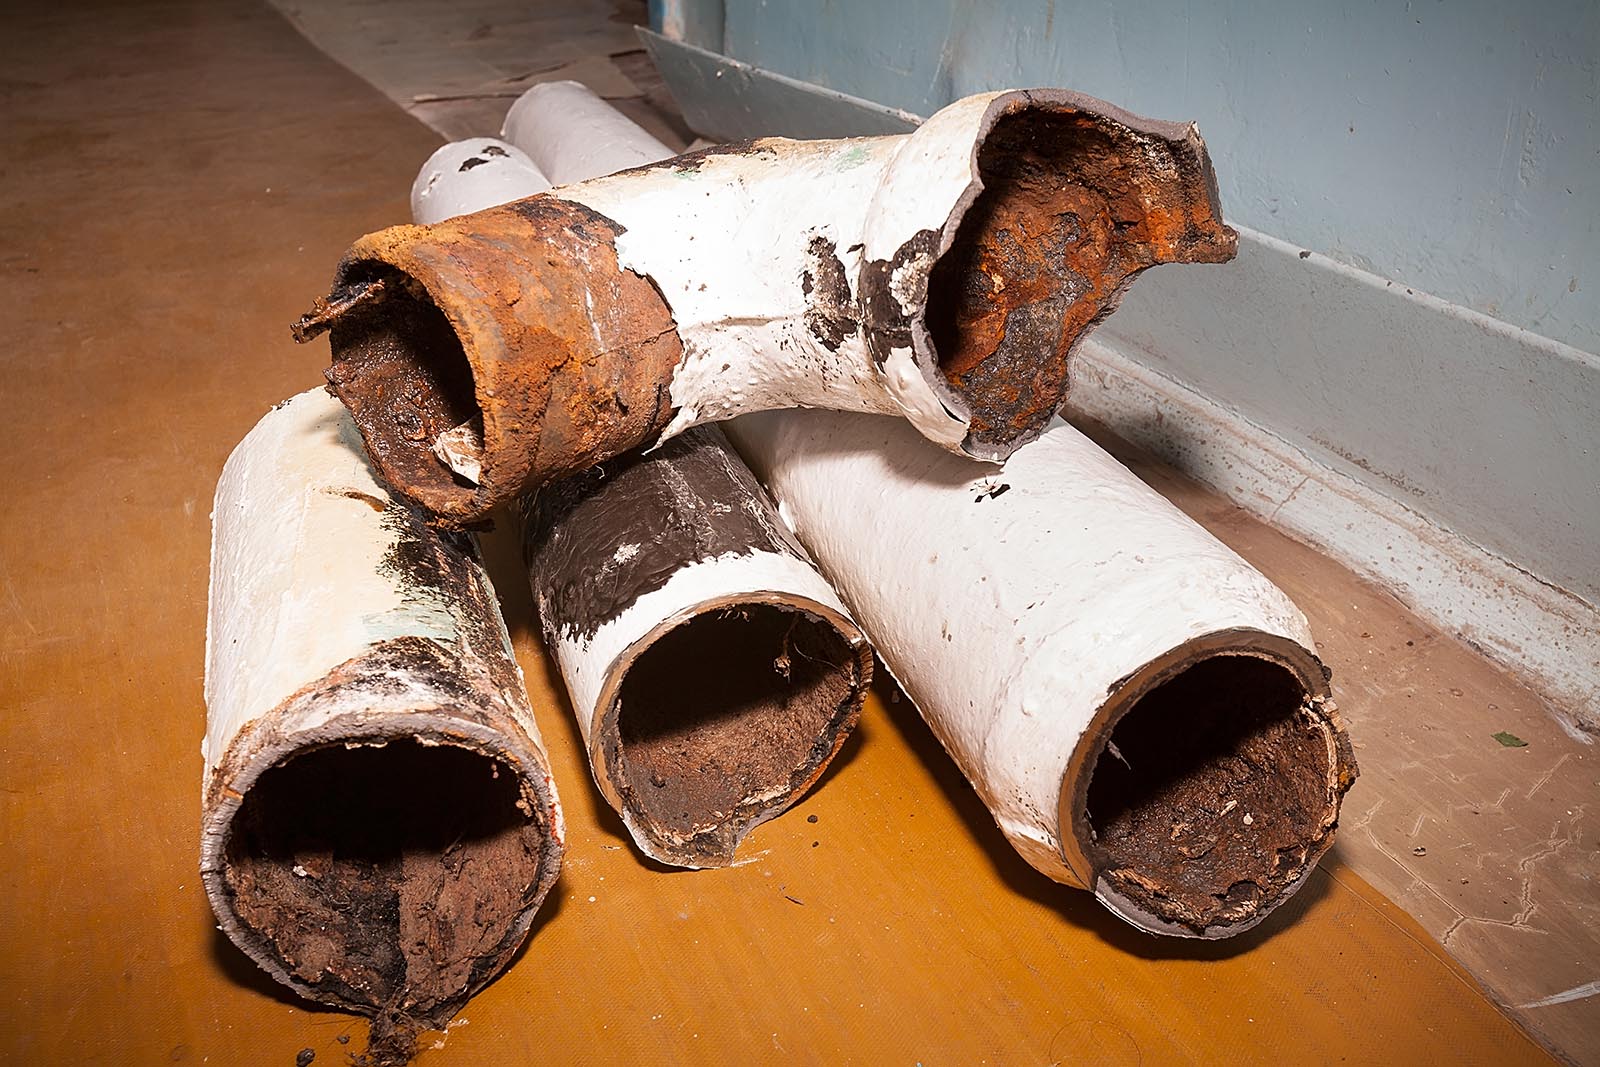 Fragments of an old pipe. Apartment in a multi-storey residential building in the city. Several pieces of piping are on the floor. Color photo.